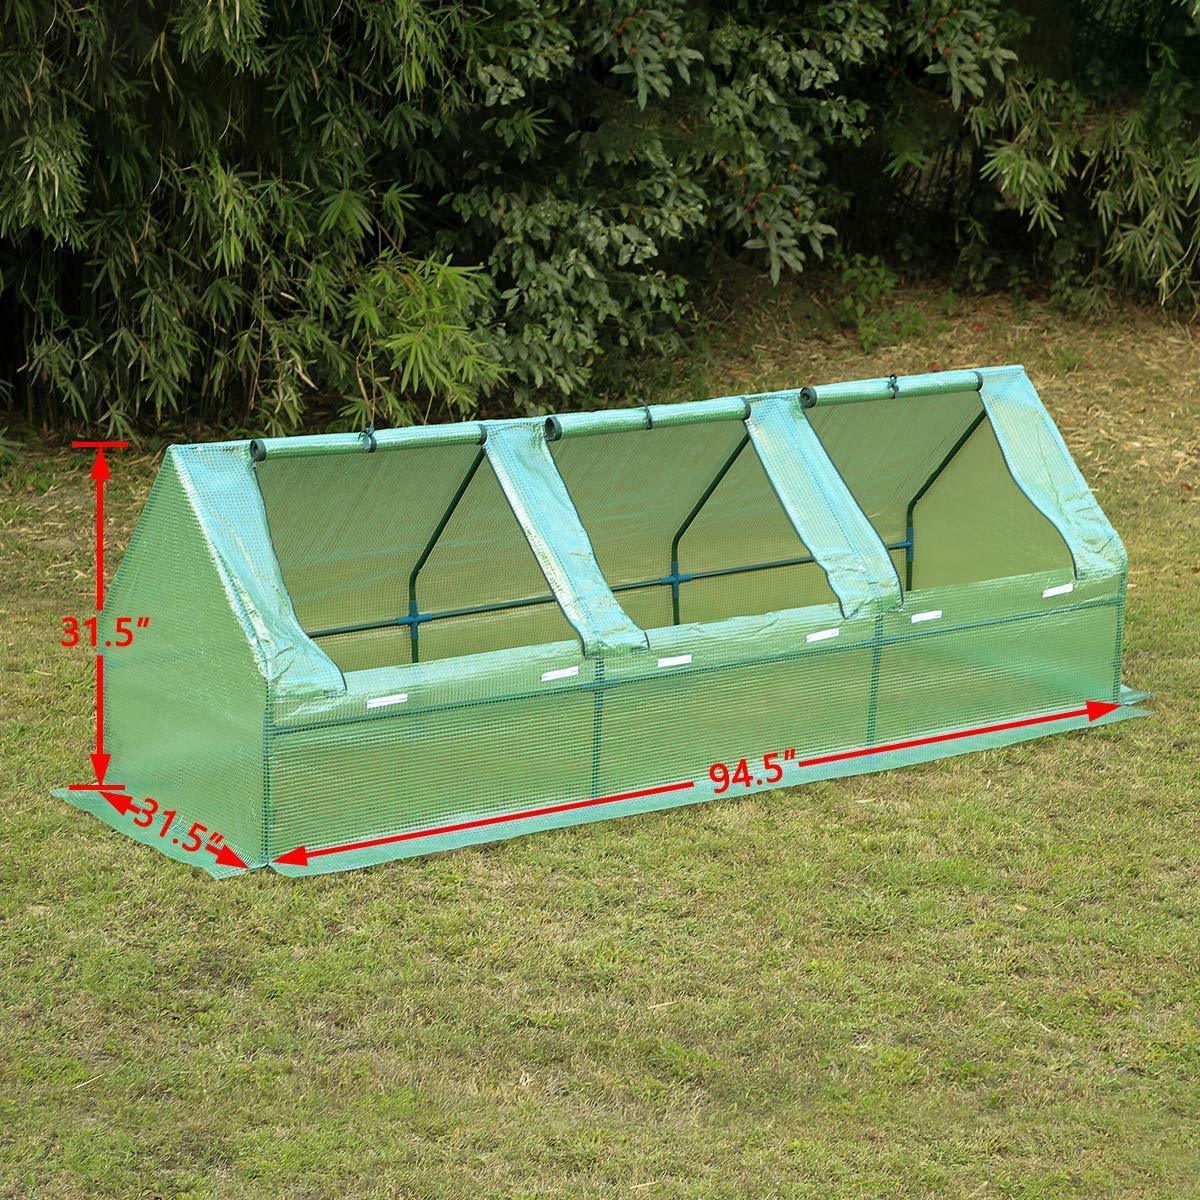 7.9&#039;x2.6&#039;x2.6&#039; Small Portable Greenhouse with Zipper Door, Green